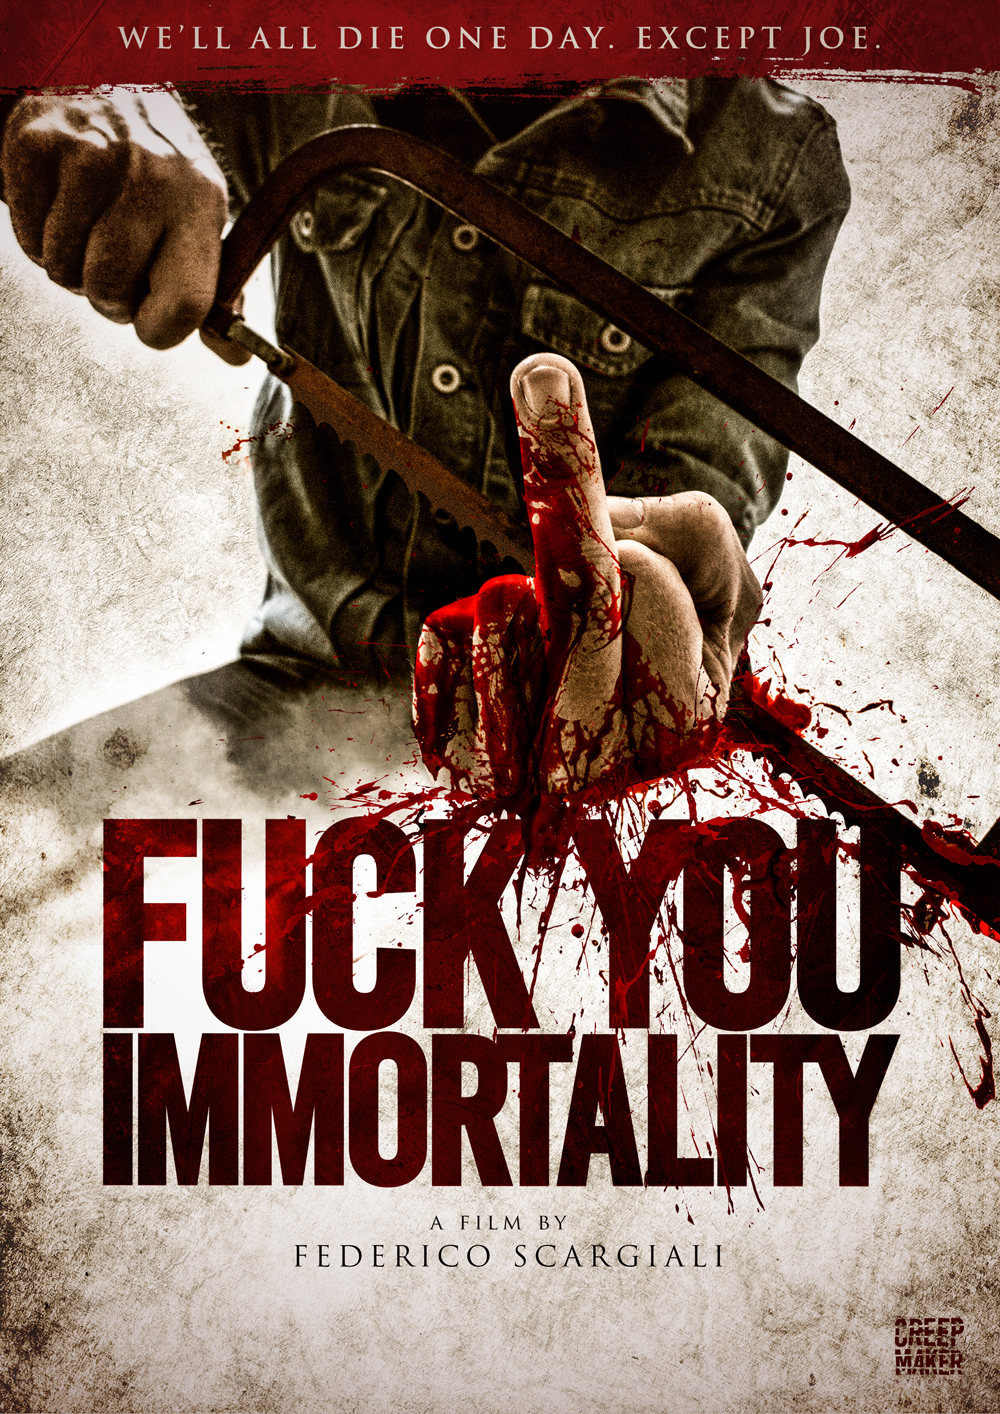 First Details for Federico Scargiali’s ‘Fuck You Immortality’